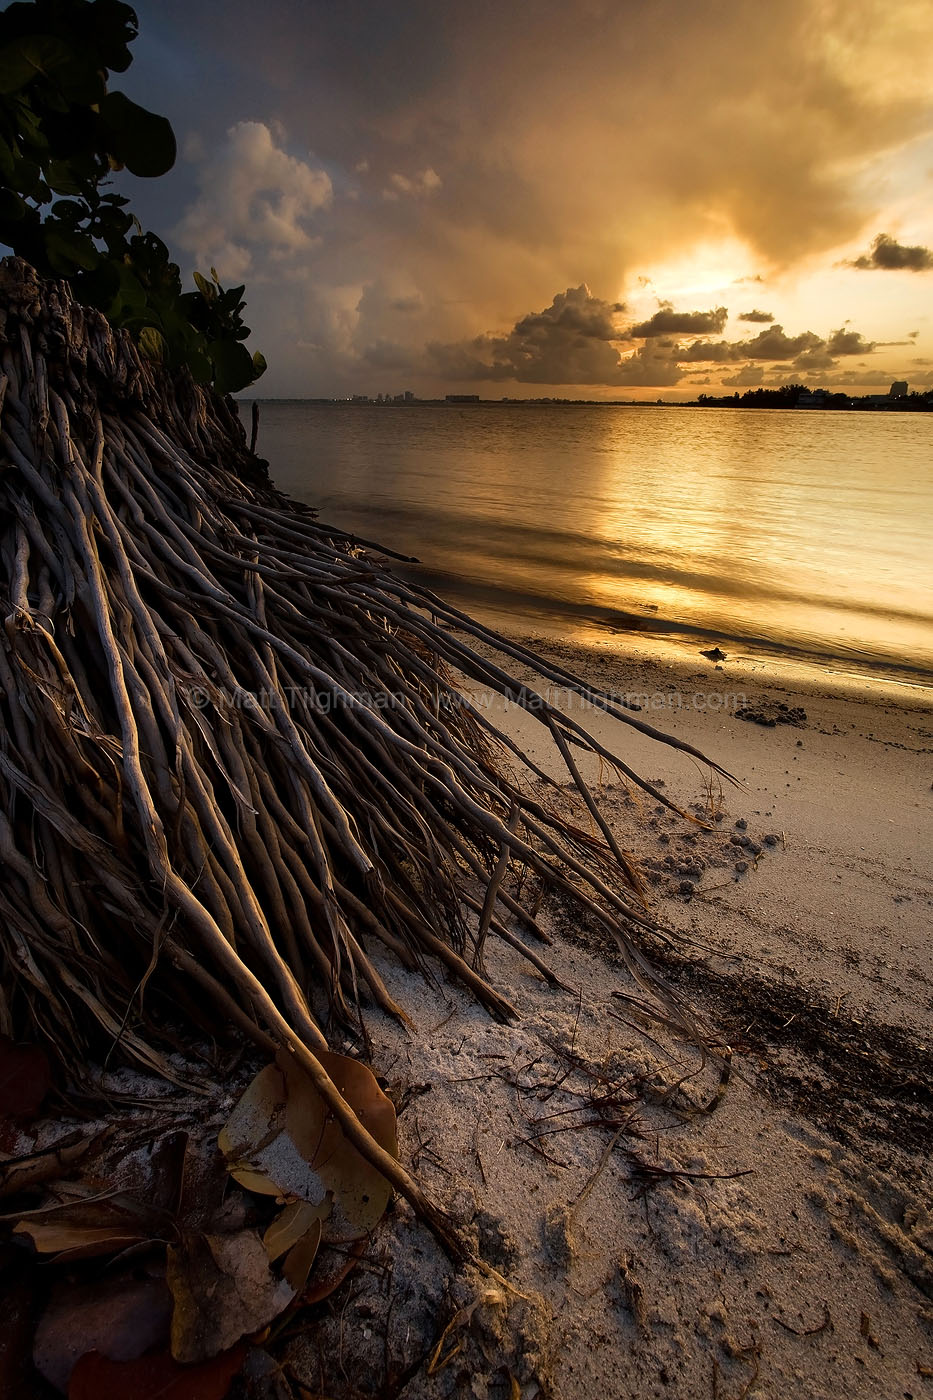 Fine art stock photograph of palm tree roots at sunset. Across the bay lies Miami, but on this portion of Key Biscayne, native foliage still rules the coastline.